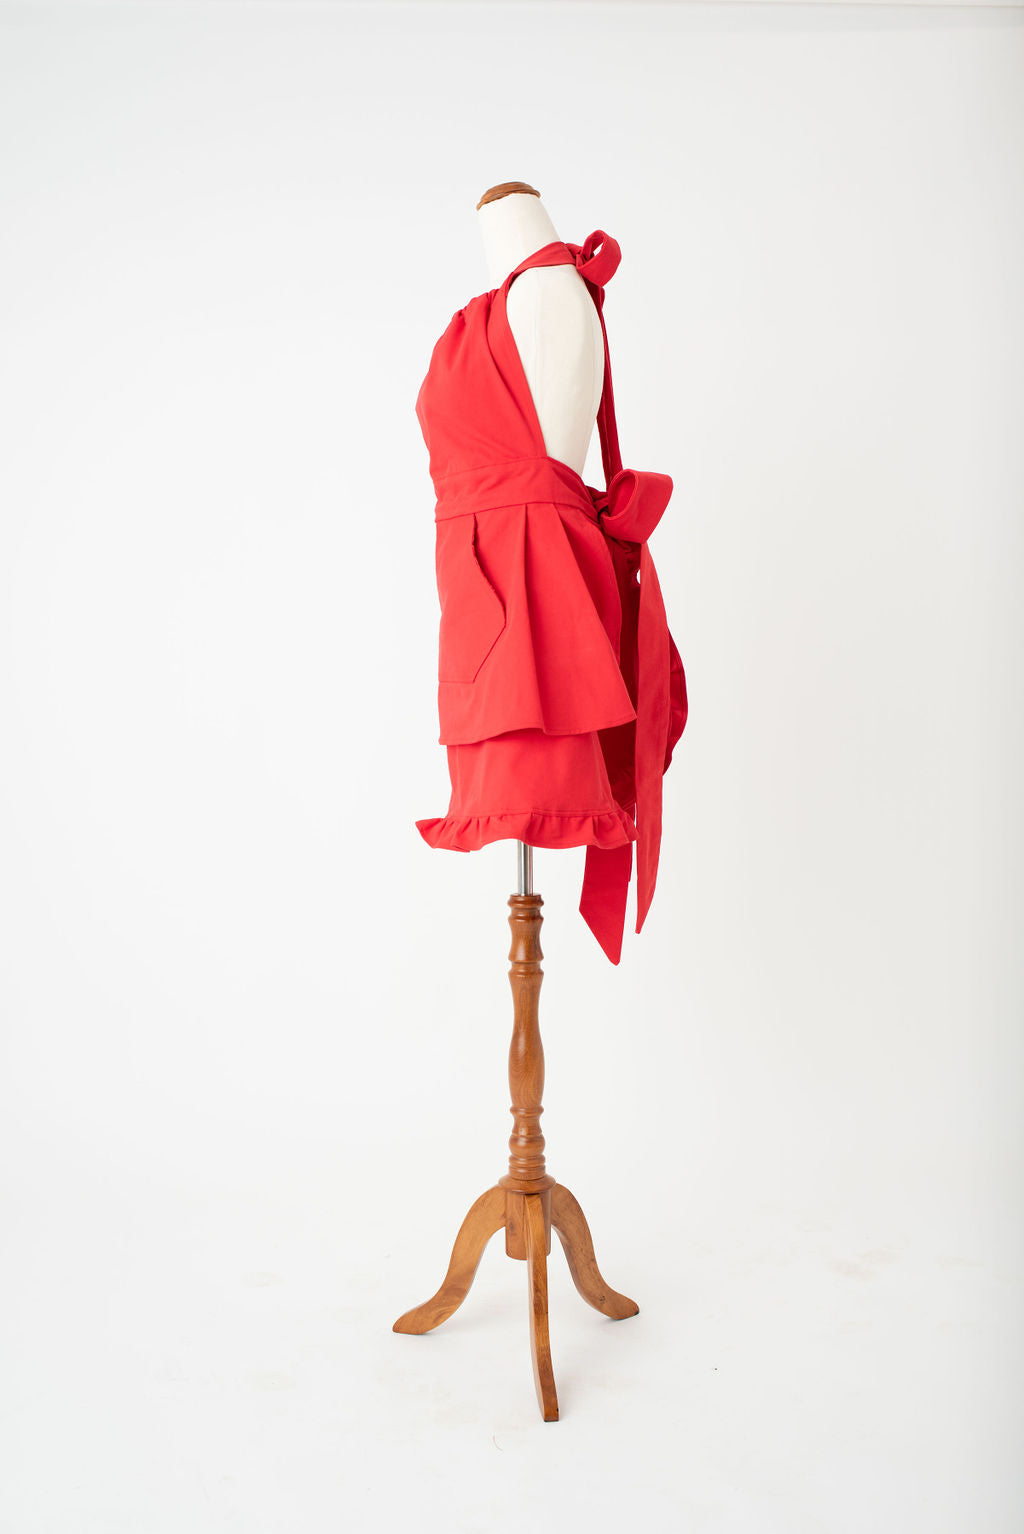 retro ruffle red apron by Pretty Made - side 